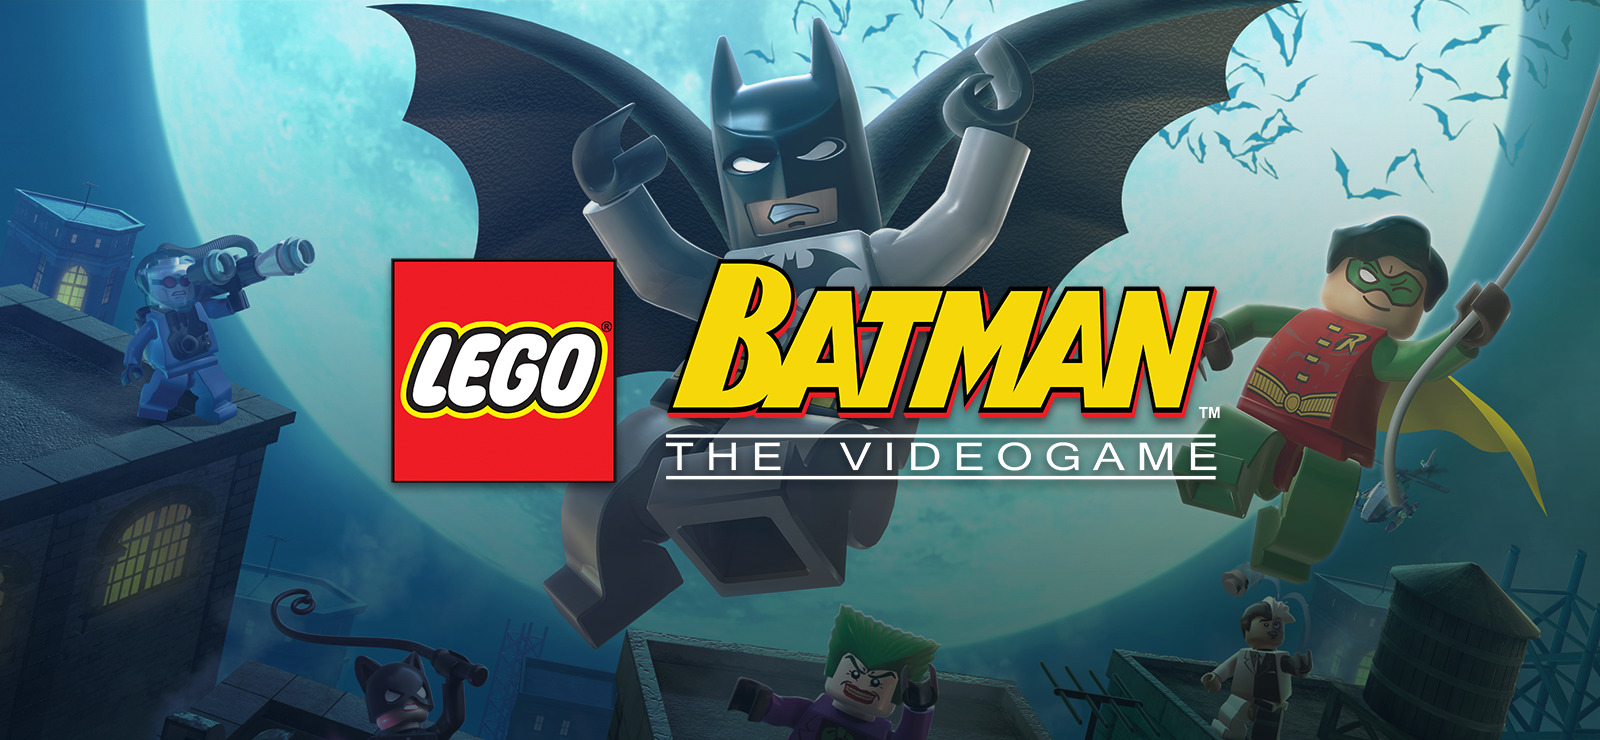 LEGO Batman: The Videogame Free Download For PC